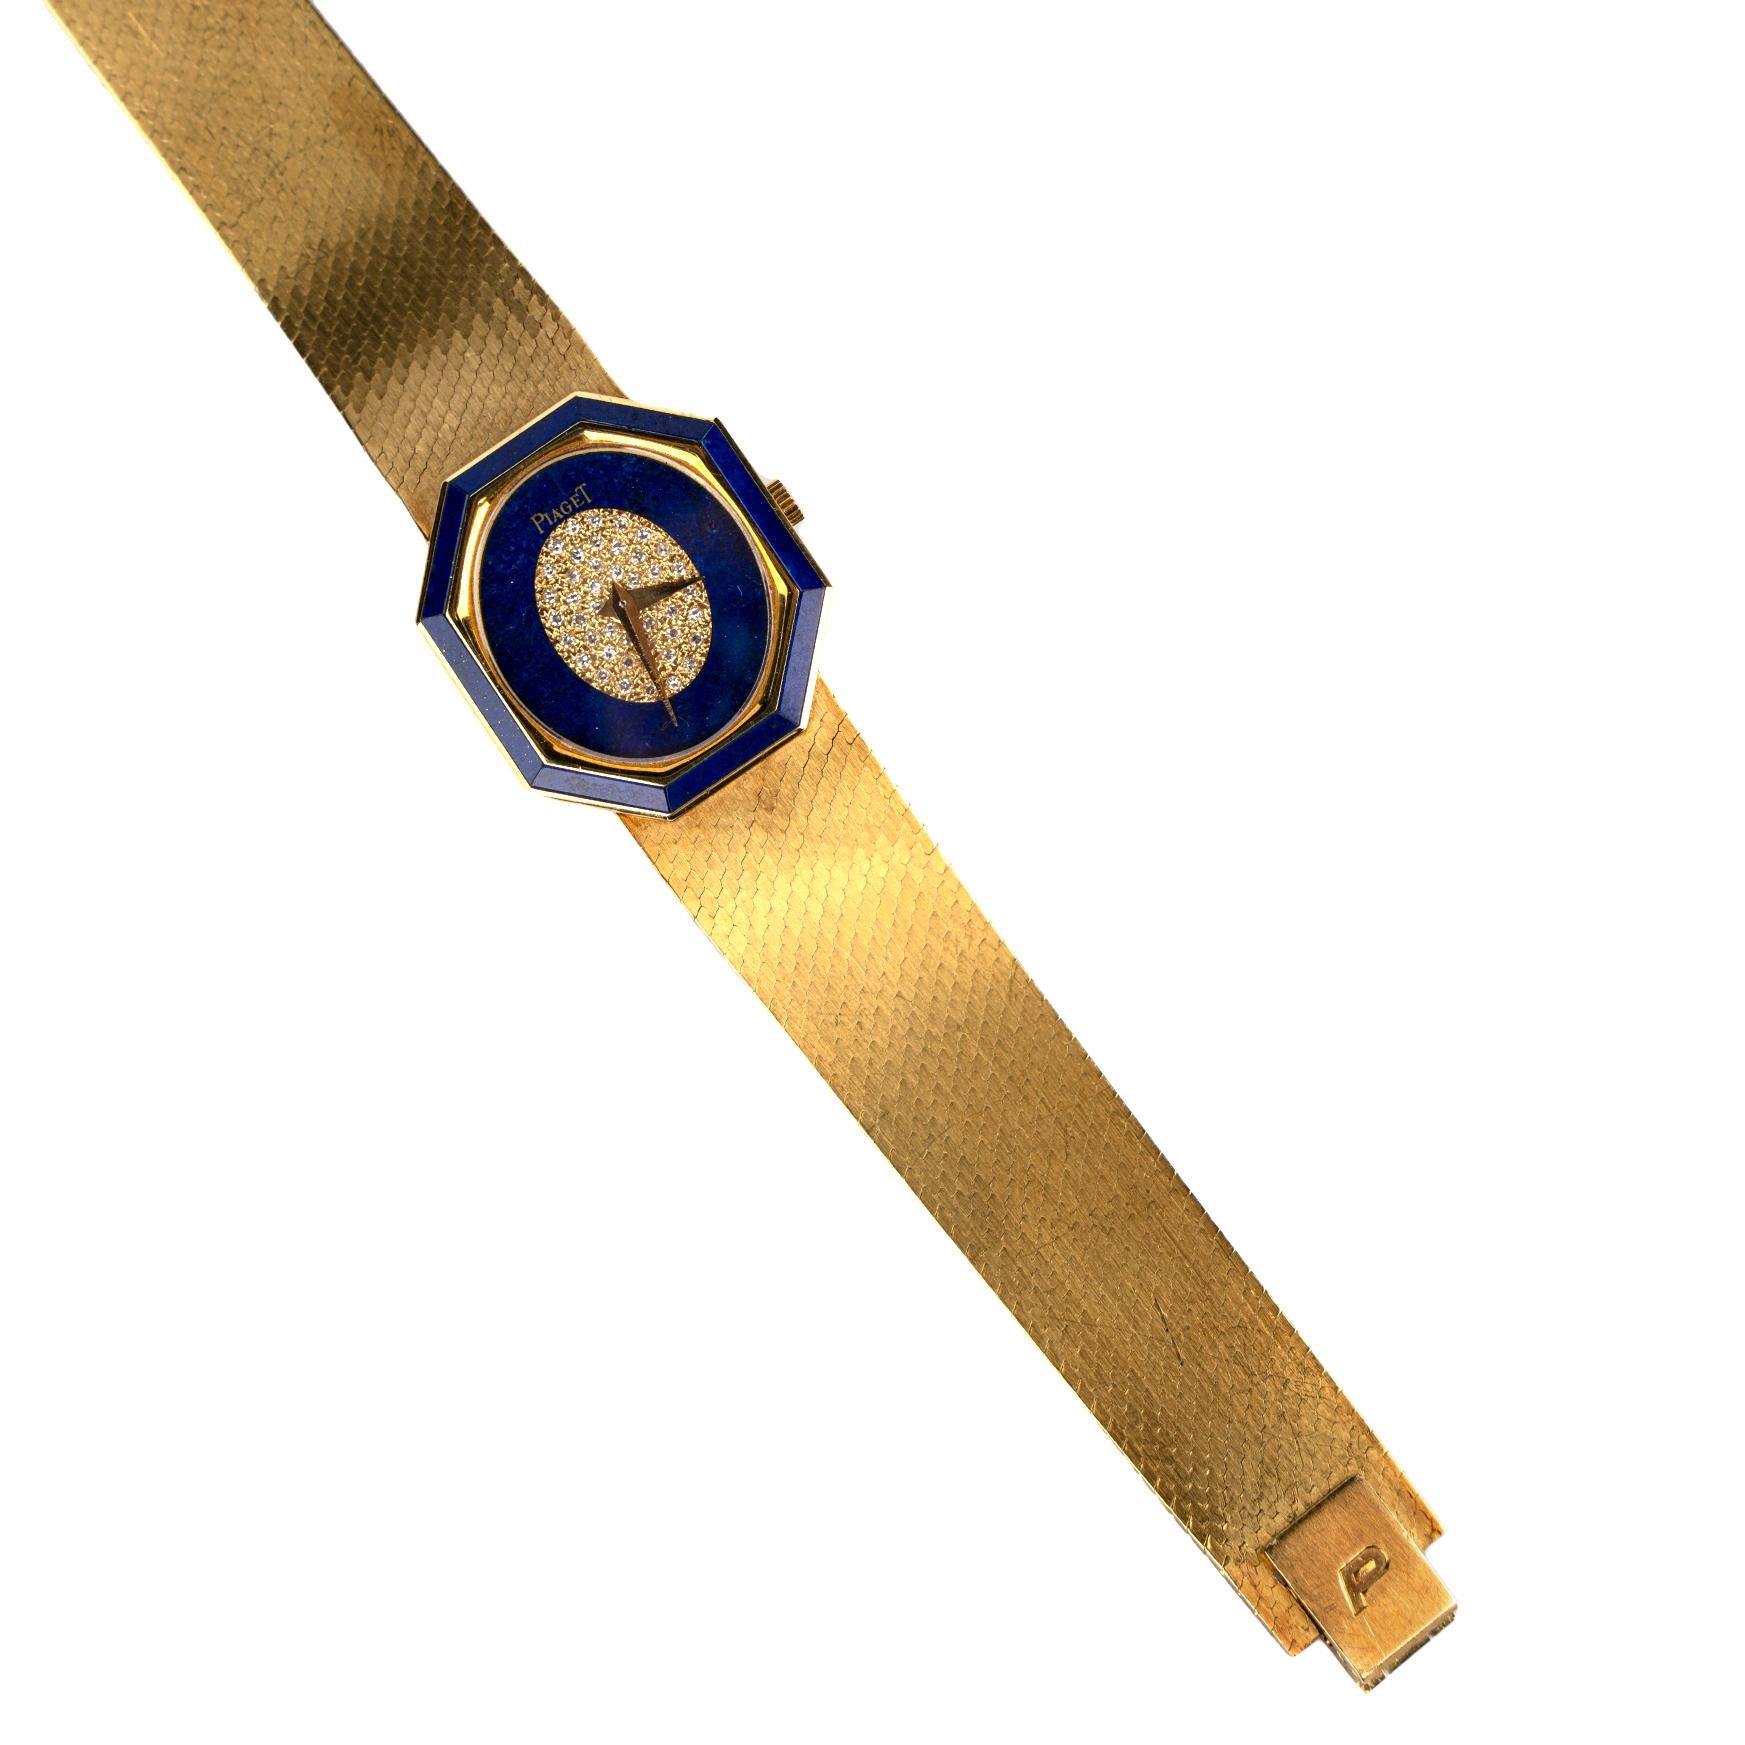 A collectible Piaget Lapis Lazuli Wrist Watch of Geometrical Design, accented by pavé diamonds on the dial and crafted in 18k yellow gold.

Made in Switzerland, circa 1970.